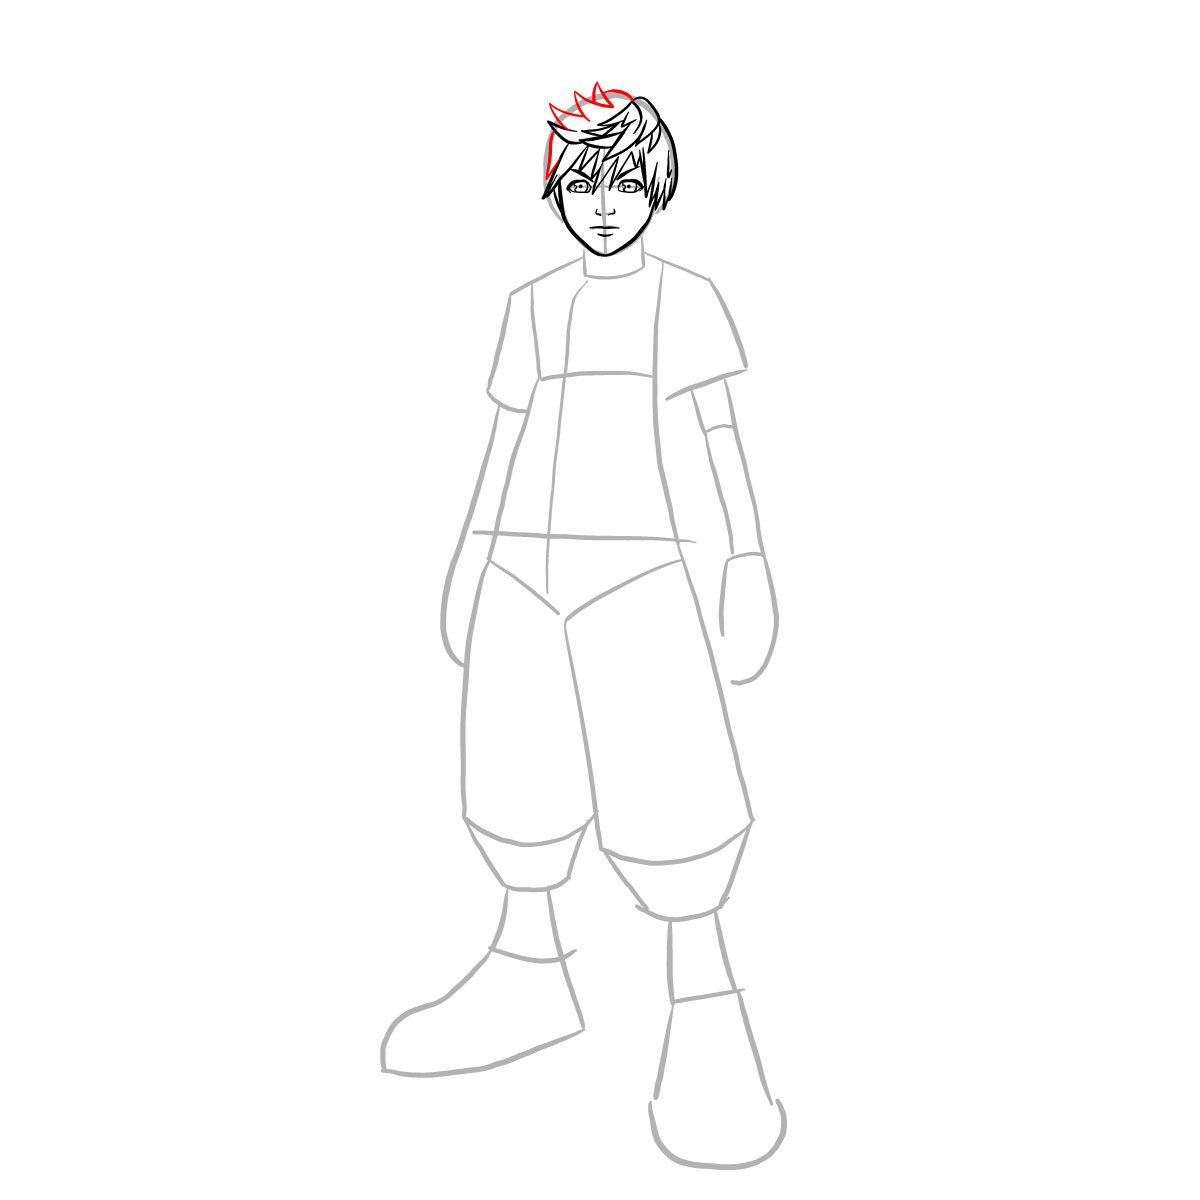 How to draw Ventus - step 14